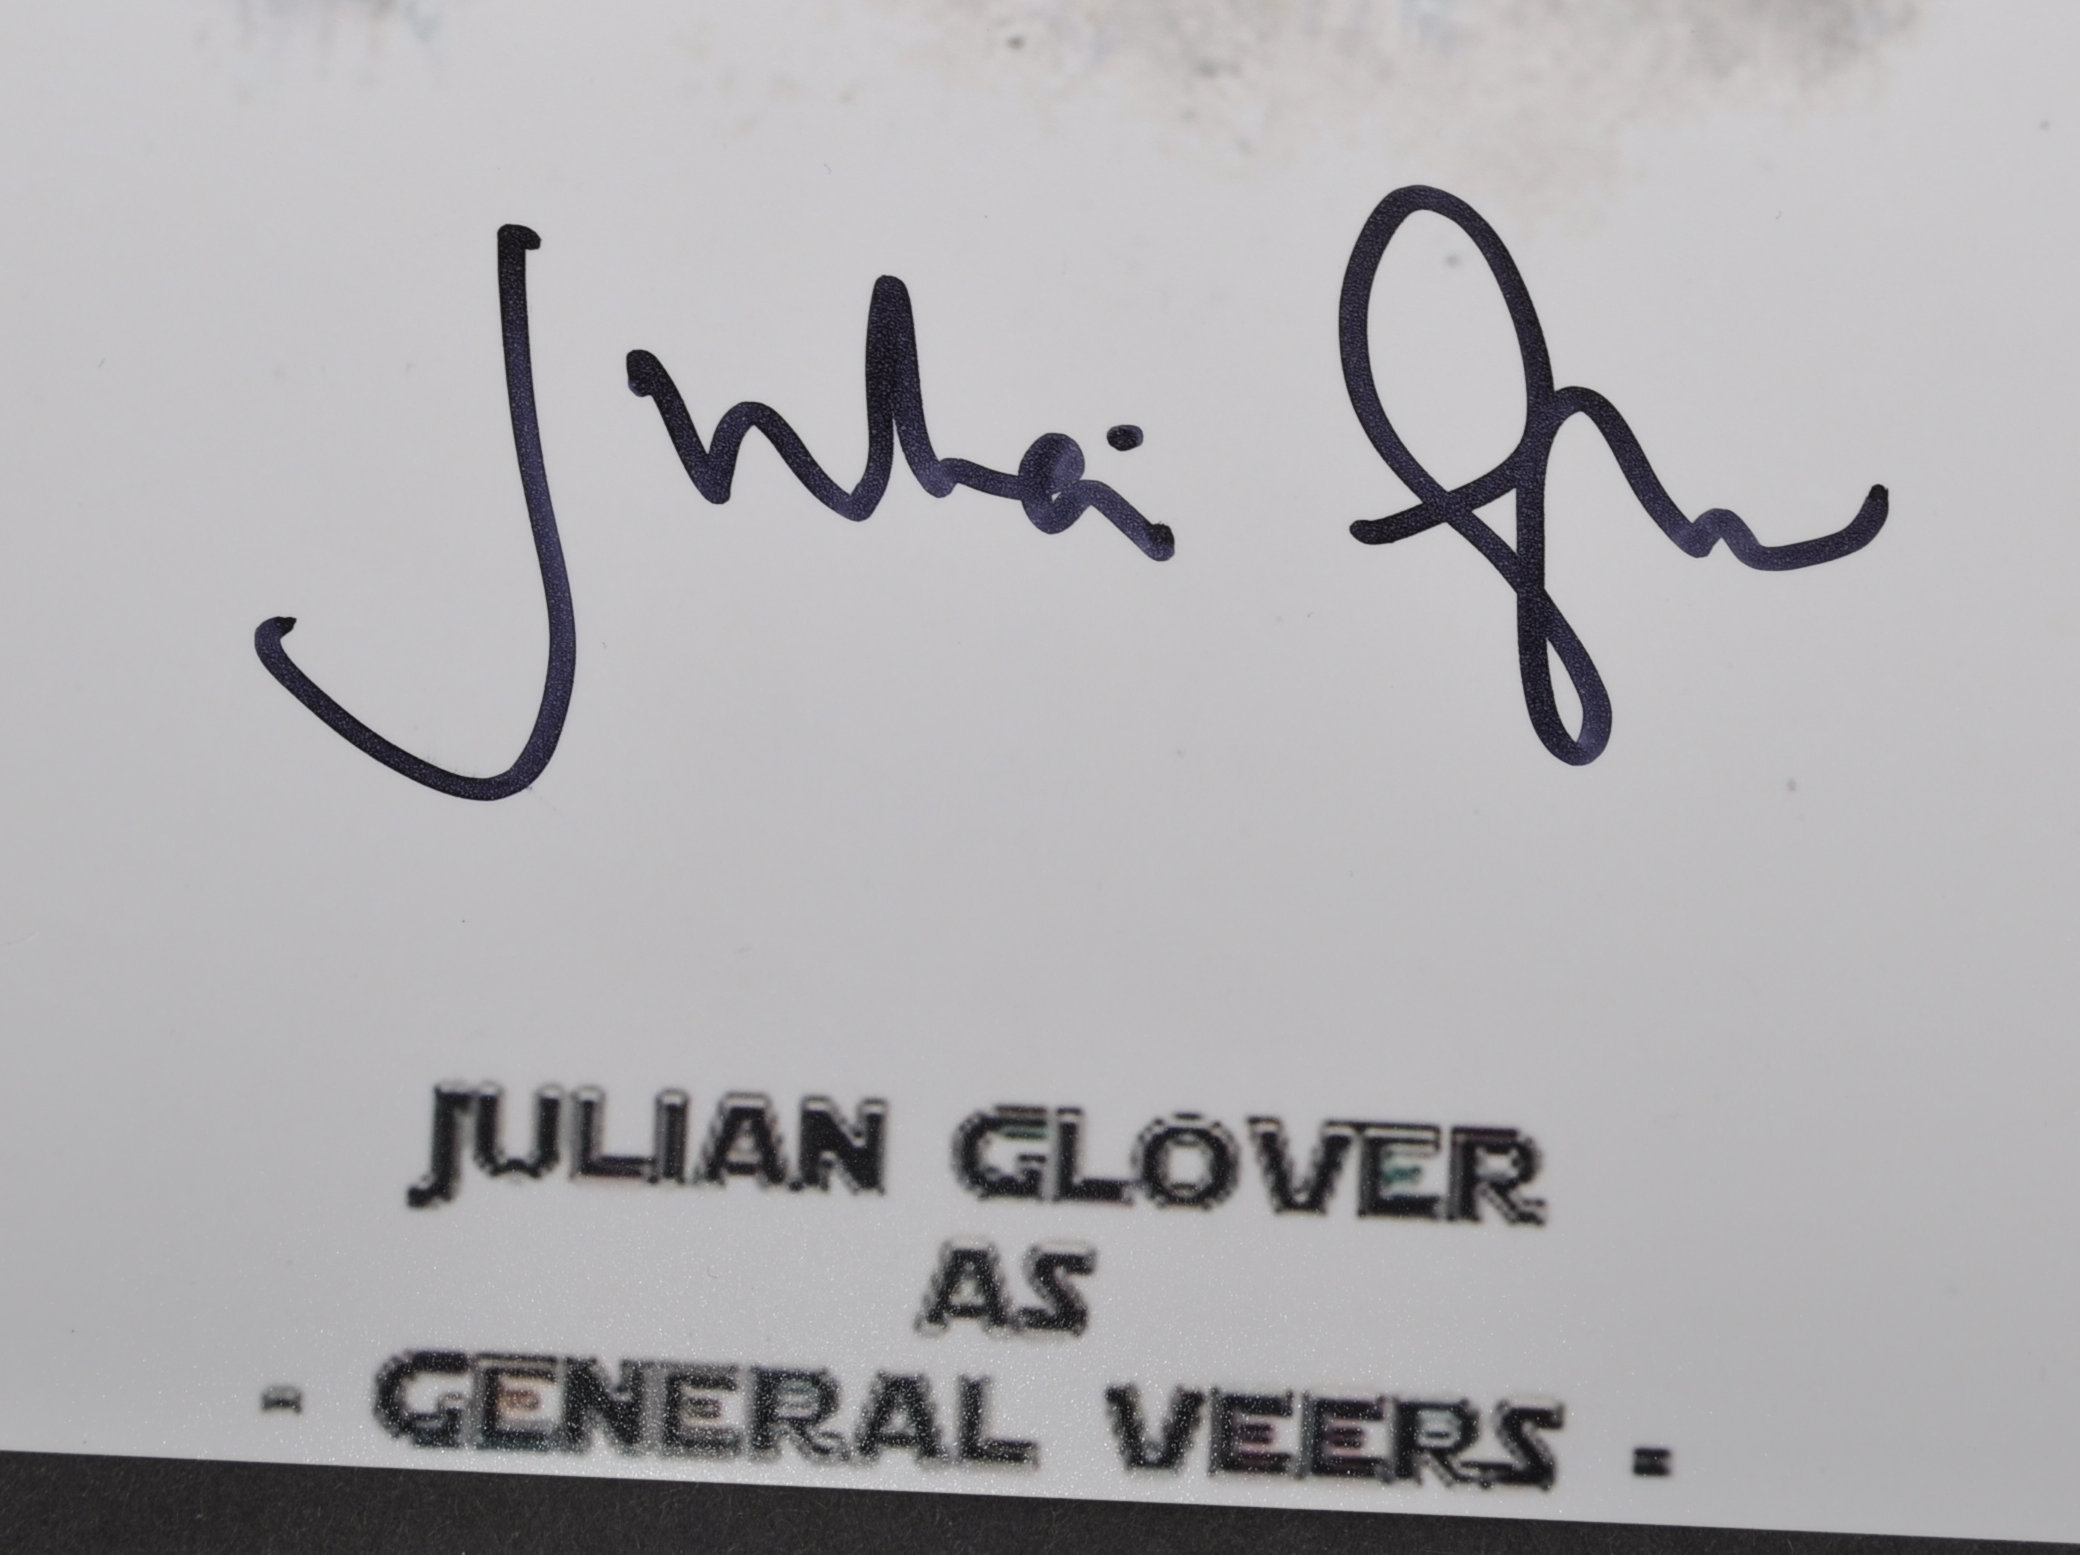 STAR WARS - JULIAN GLOVER AUTOGRAPHED PHOTOGRAPH - Image 2 of 2